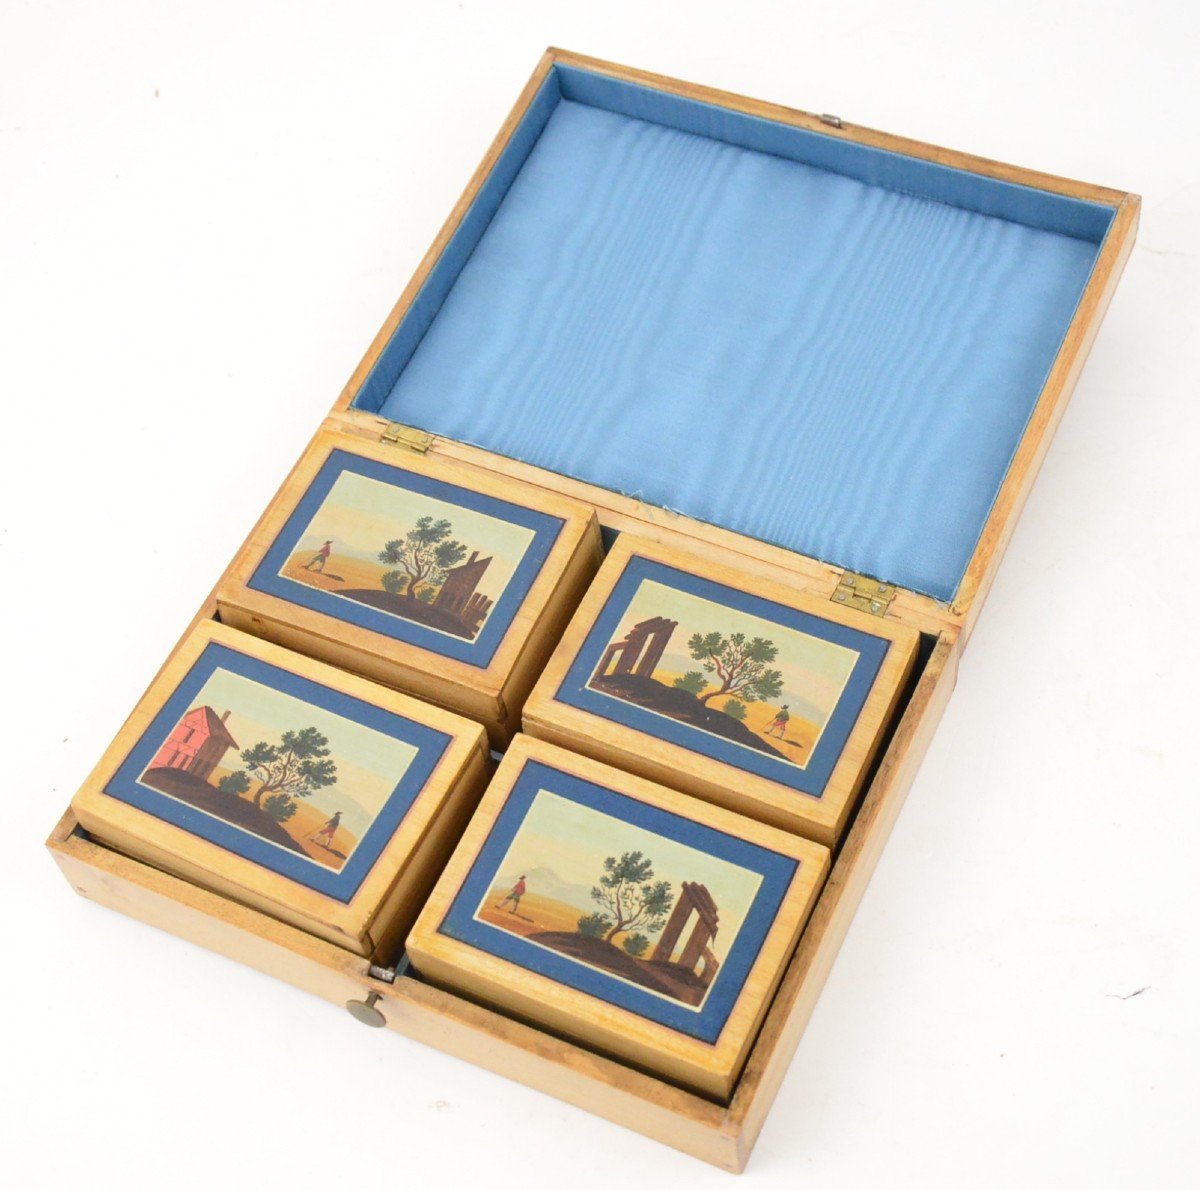 Box With Four Spa Wooden Boxes Decorated With Animated Romantic Landscapes Circa 1900